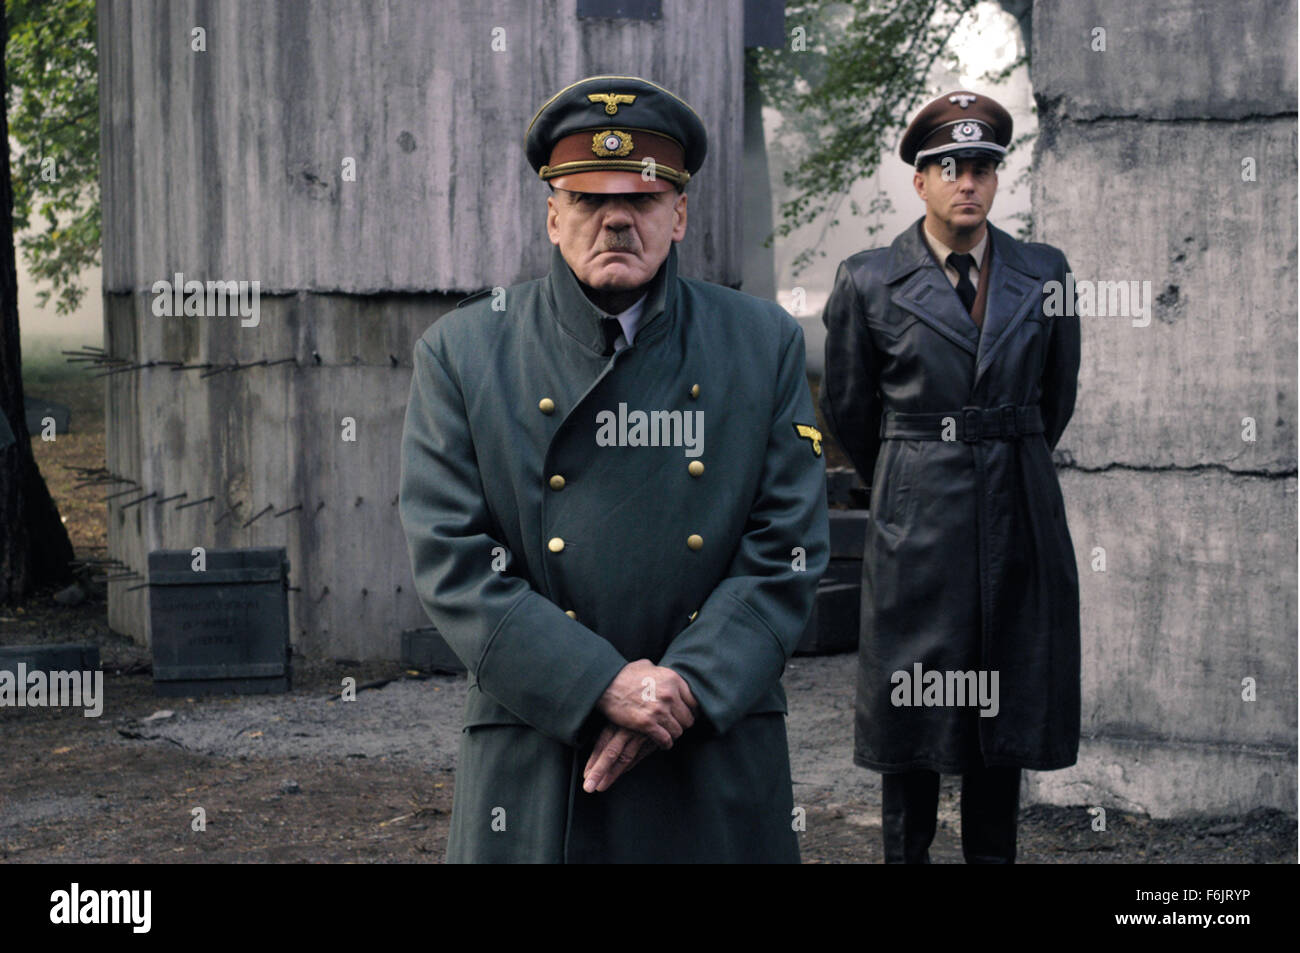 RELEASE DATE: February 15, 2005. MOVIE TITLE: Downfall. STUDIO: Constantin Film Produktion. PLOT: Traudl Junge, the final secretary for Adolf Hitler, tells of the Nazi dictator's final days in his Berlin bunker at the end of WWII. PICTURED: BRUNO GANZ as Adolf Hitler. Stock Photo